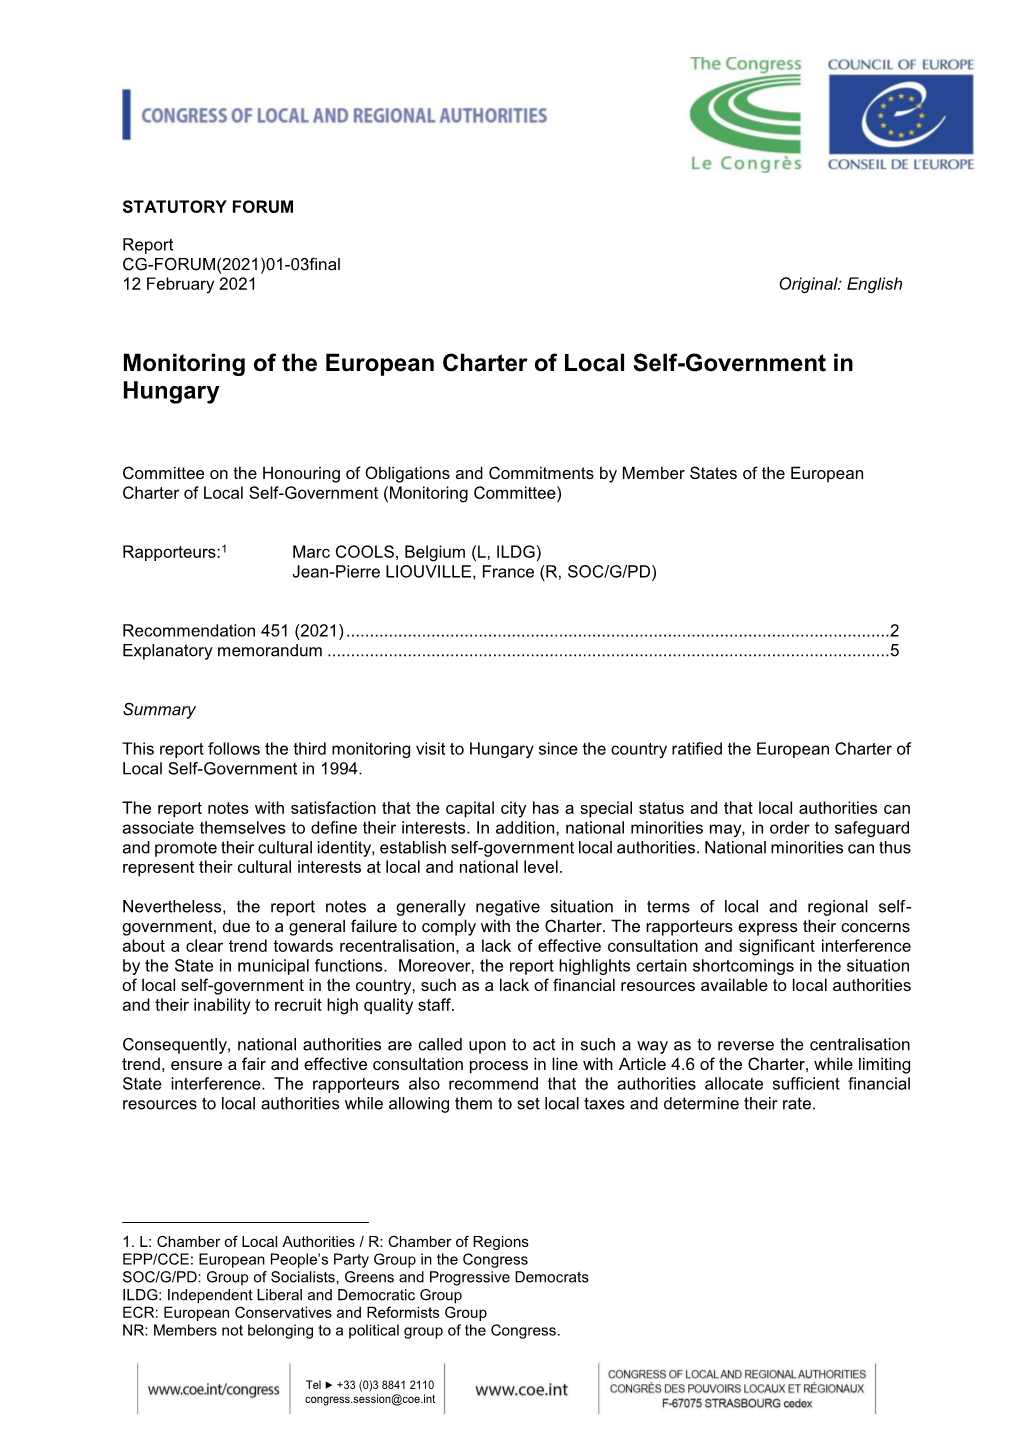 Monitoring of the European Charter of Local Self-Government in Hungary